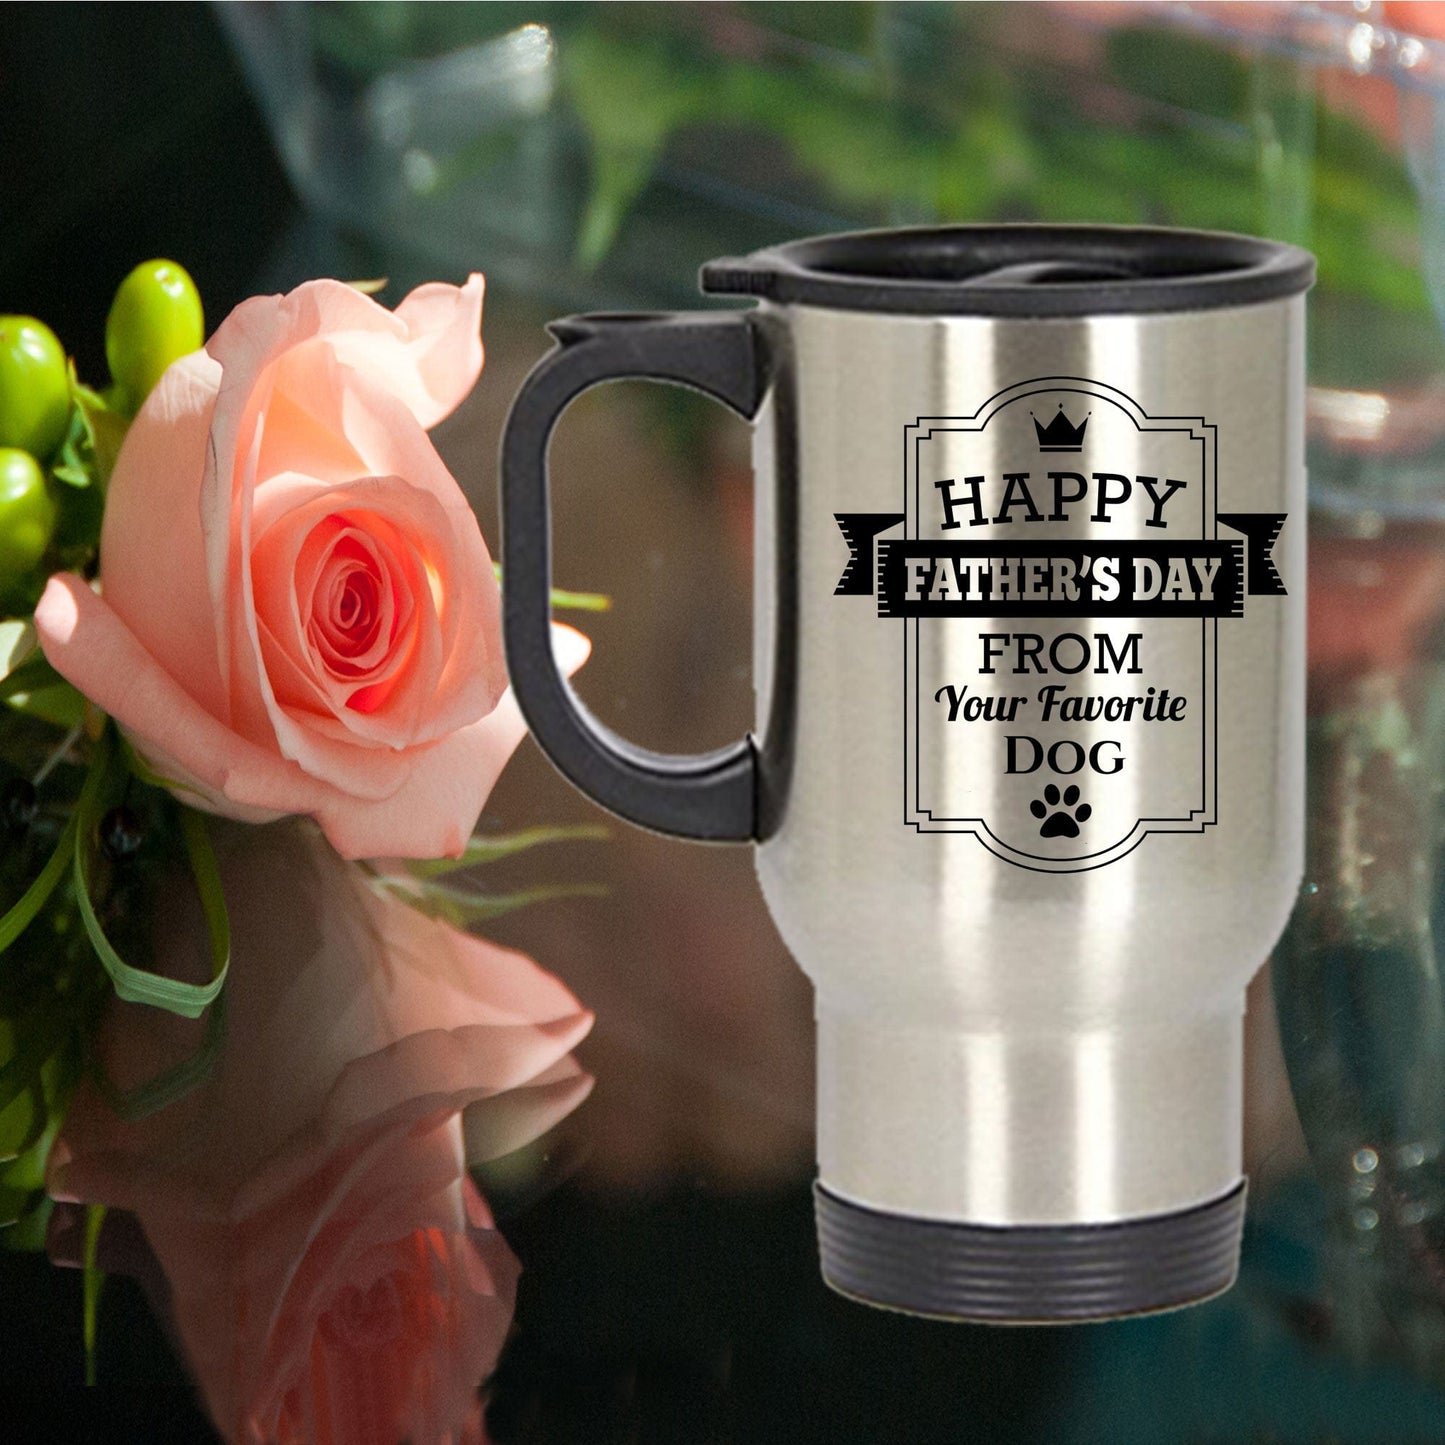 Father's Day Travel Mug from Favorite Dog